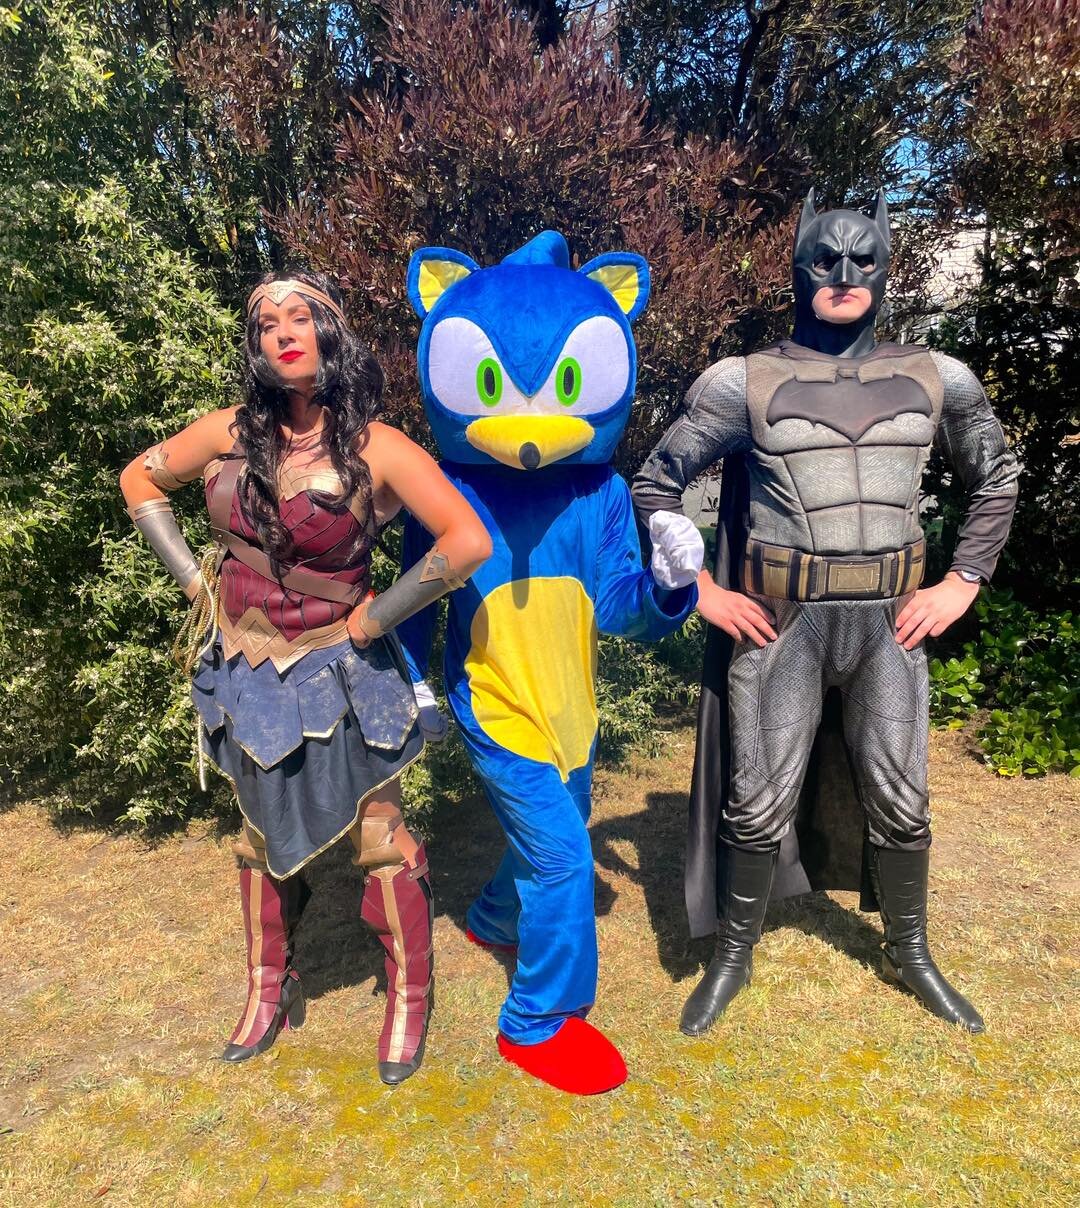 Superhero Friday!!!

What a great trio! Sonic, Wonder Woman and Batman!

BOOK YOUR SUPERHEROES NOW!
www.crowntastic.co.nz

#boypartyideas #sonicthehedgehog #superheroparty #batmanparty #supermanparty #crowntasticevents #kidspartyentertainer #spiderma